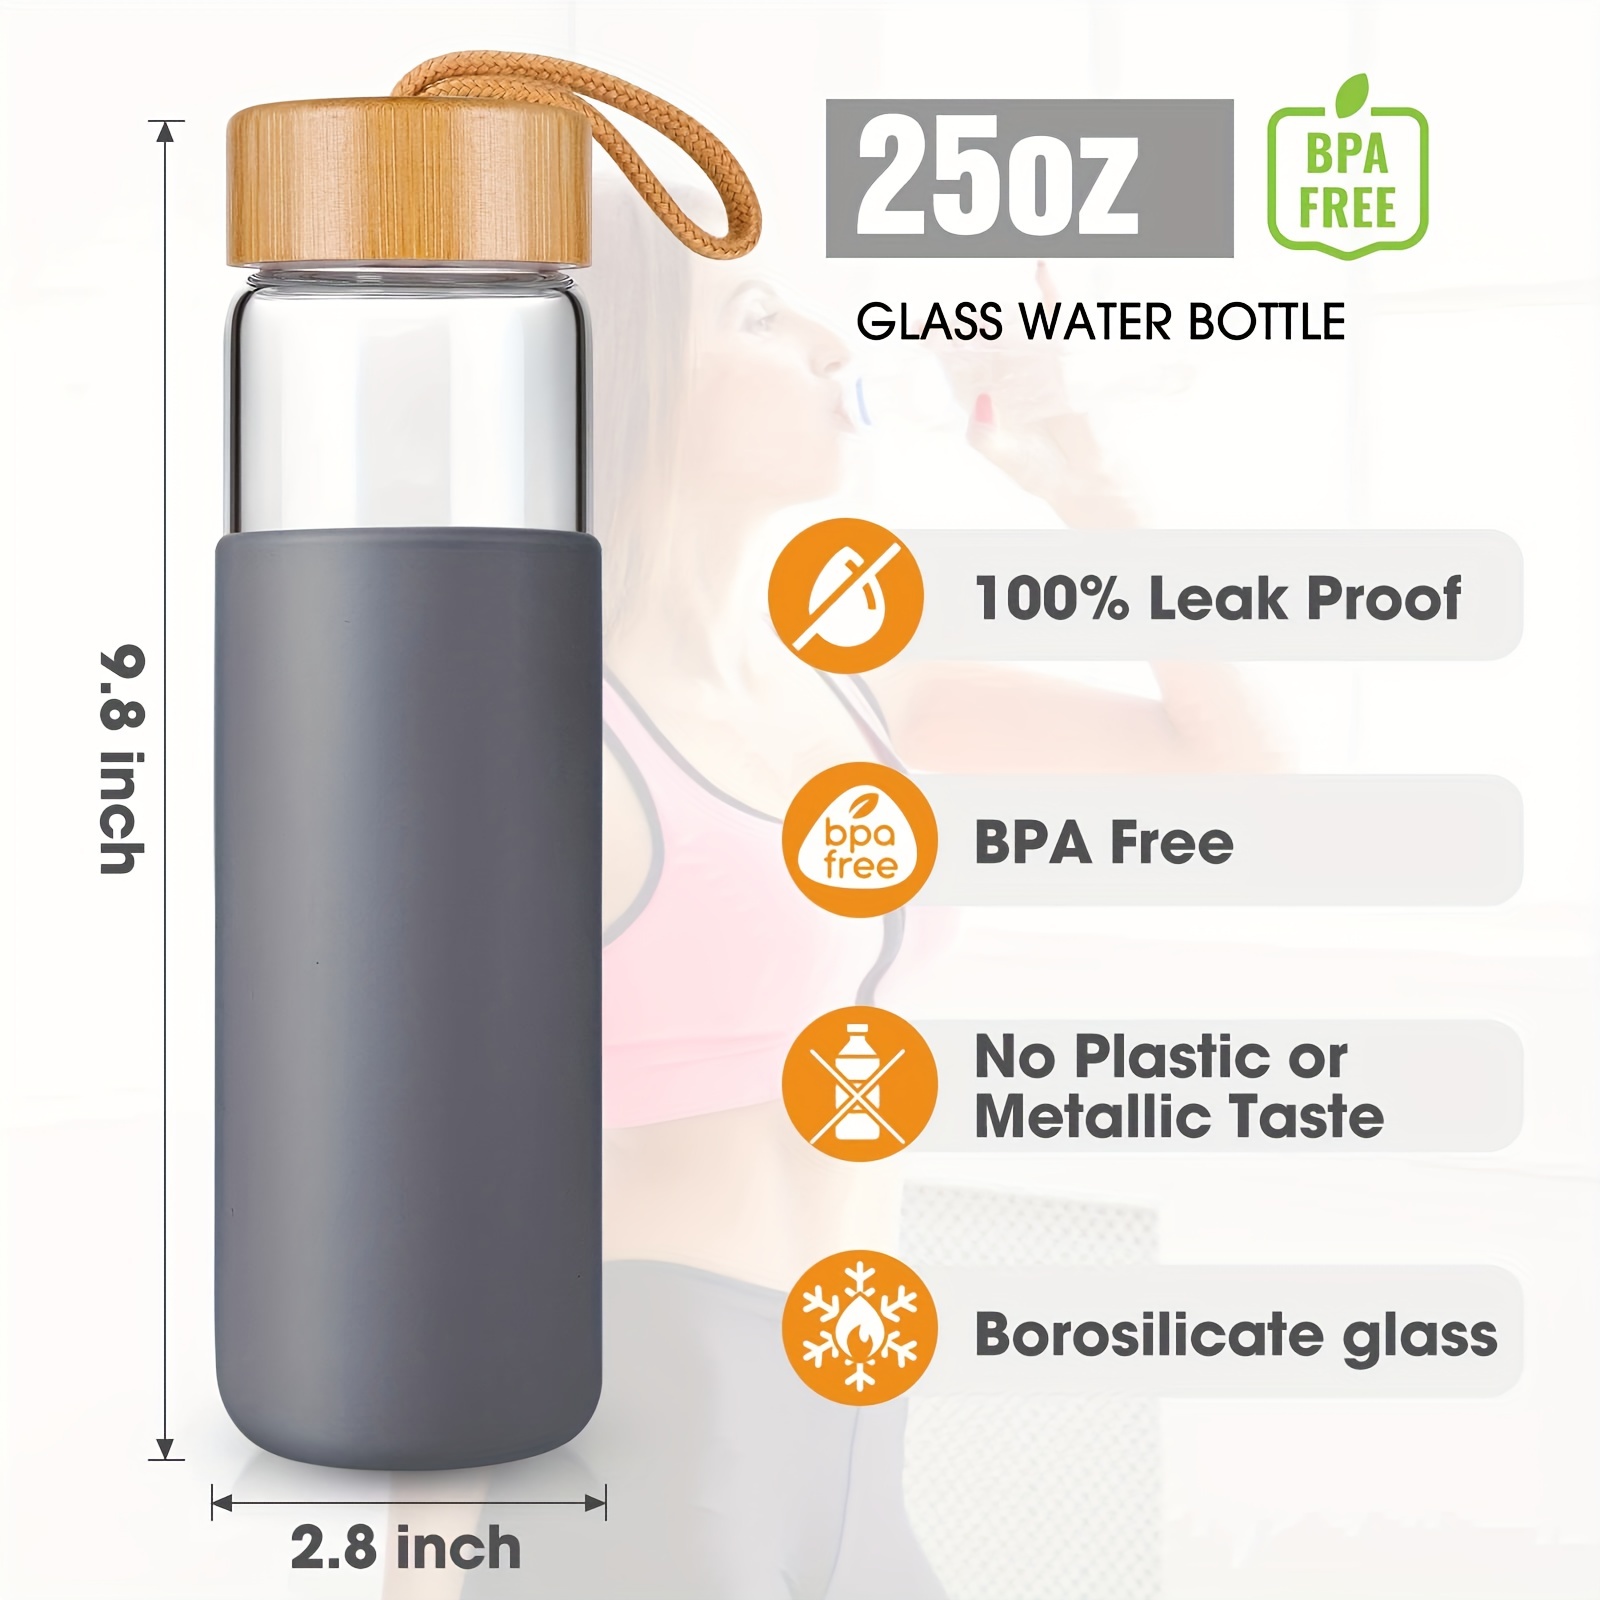 he Better Home Borosilicate Glass Water Bottle with Sleeve (500ml